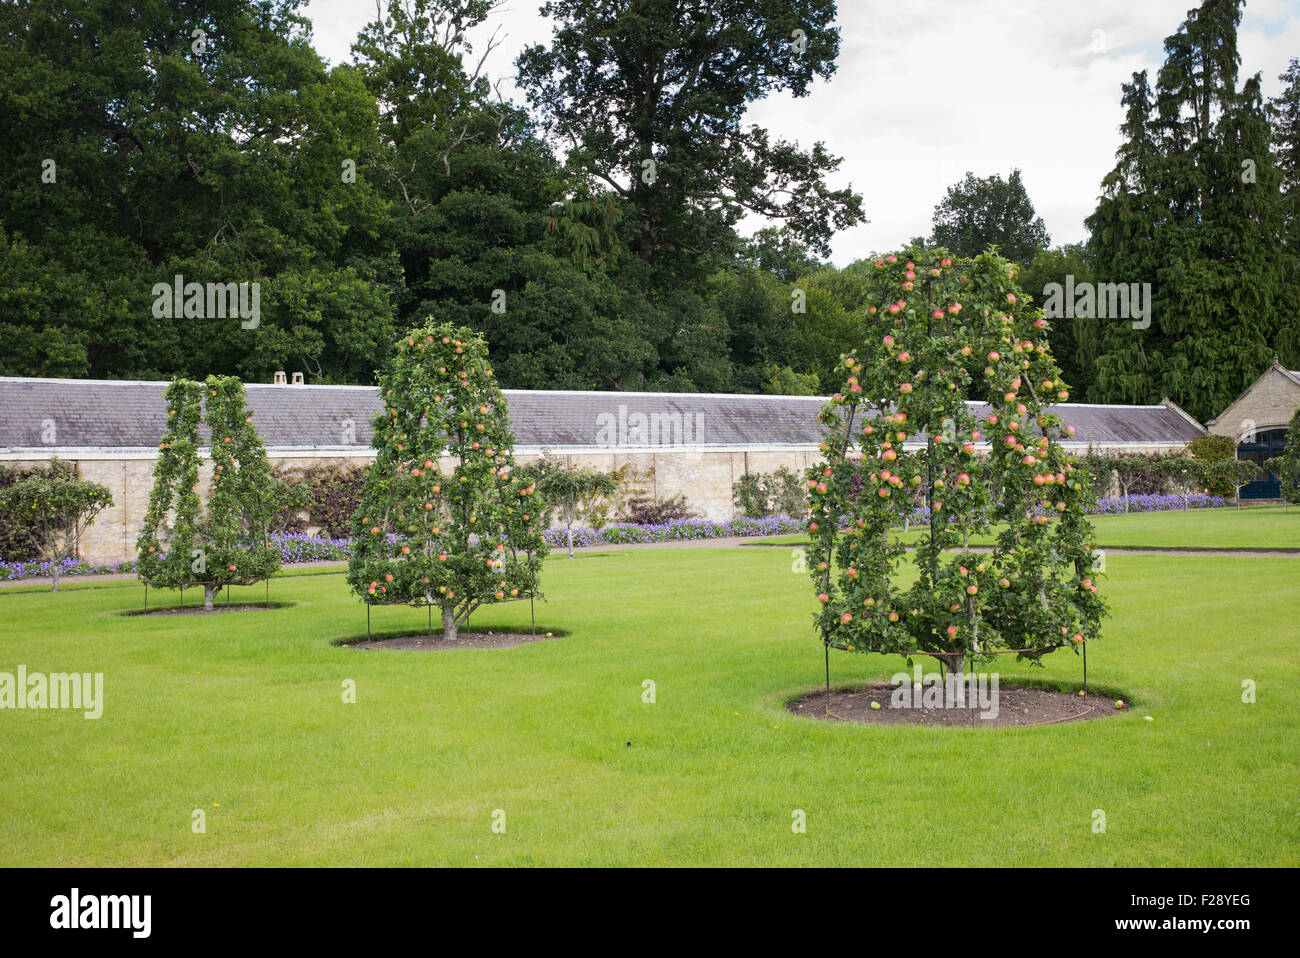 Frame trained apple trees at Floors Castle gardens Kelso, Scotland Stock Photo